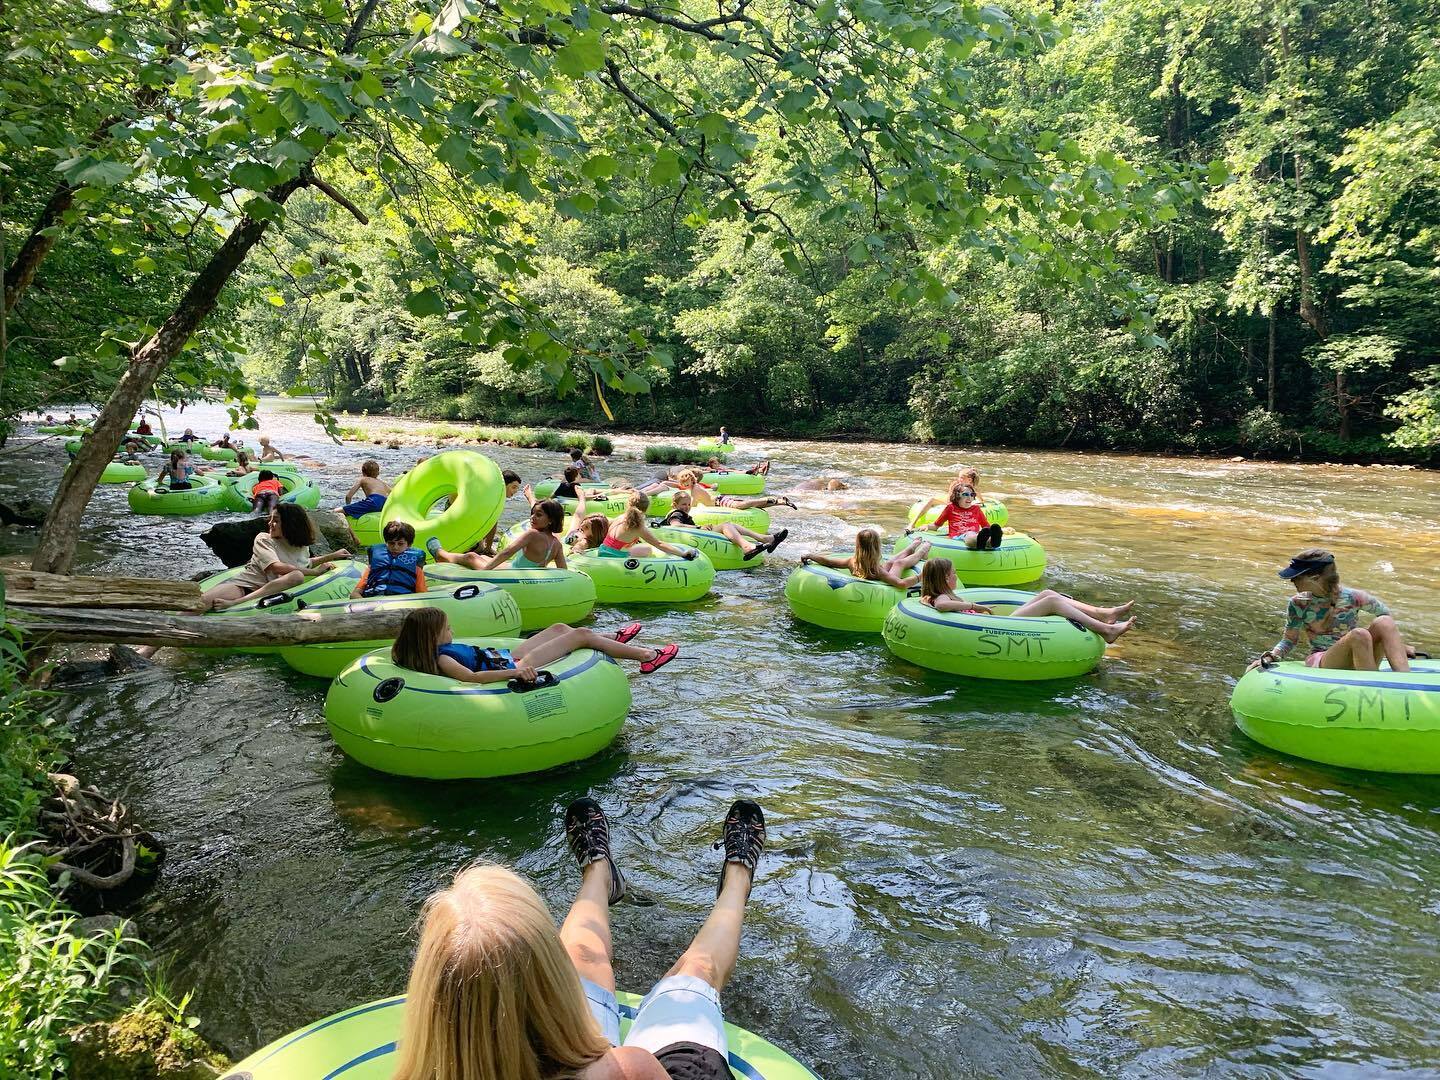 An image of people tubing down the Shiawassee River.